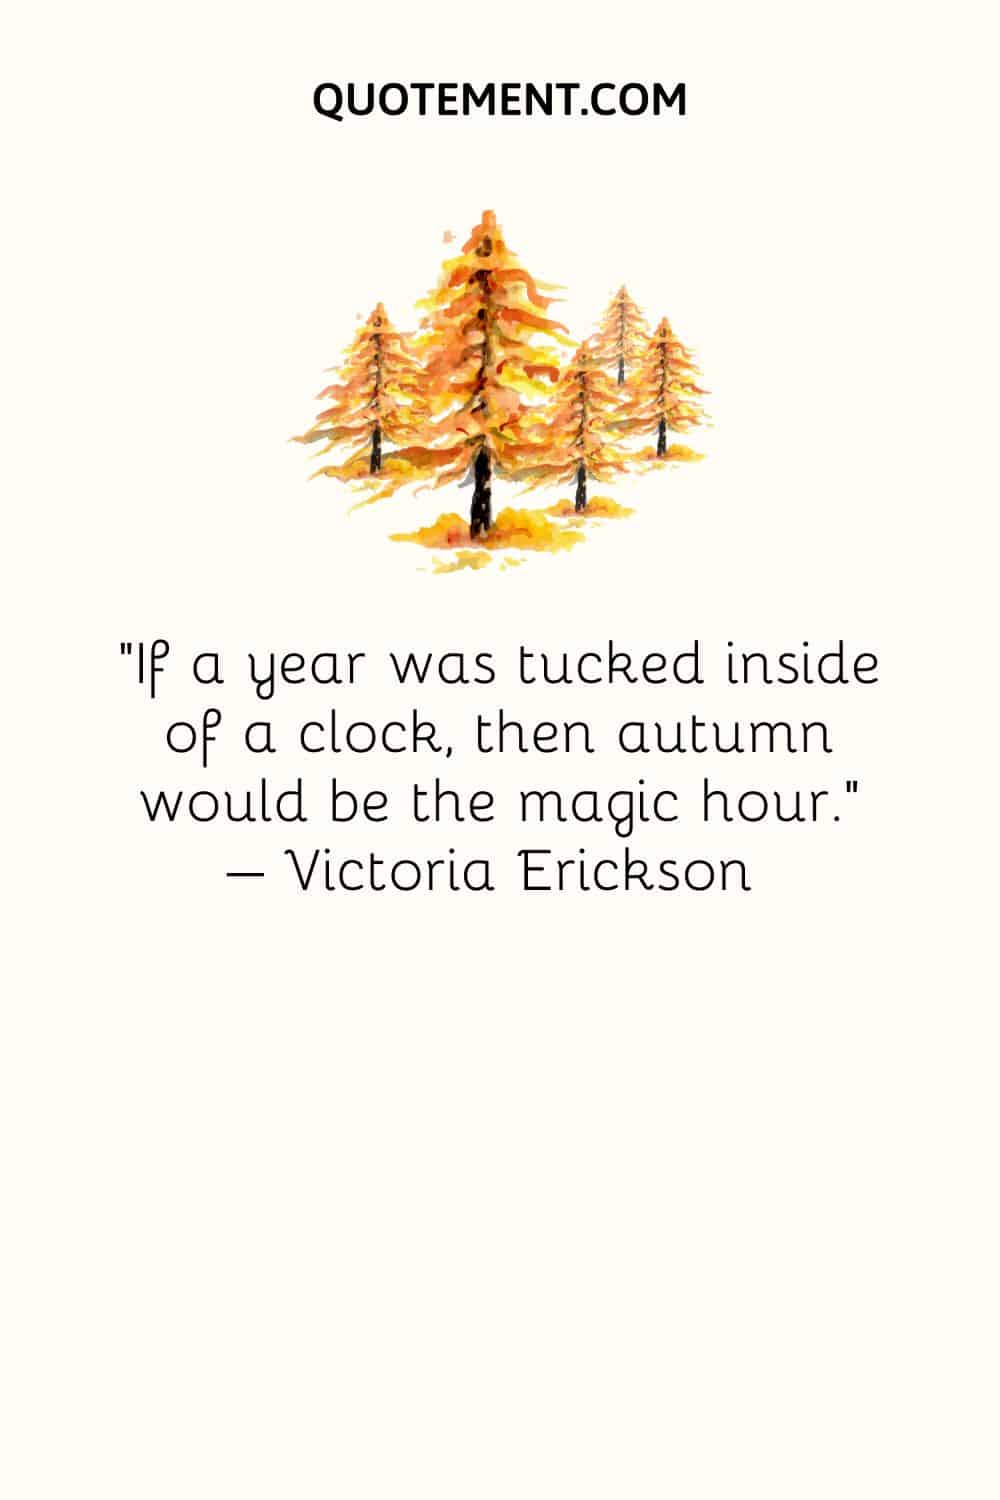 “If a year was tucked inside of a clock, then autumn would be the magic hour.” – Victoria Erickson